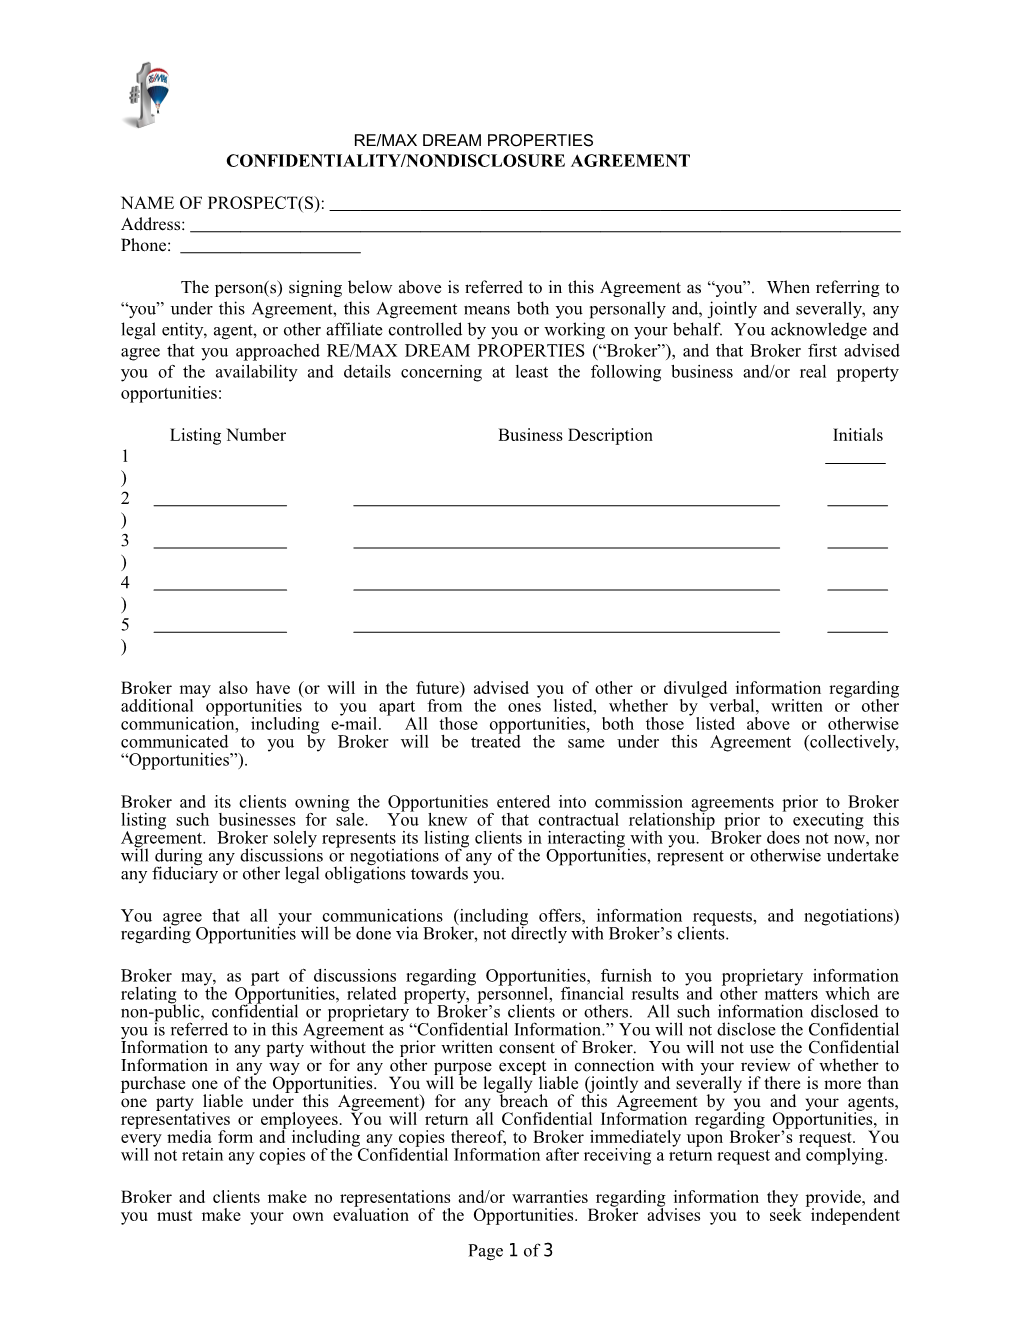 Confidentiality/Nondisclosure Agreement